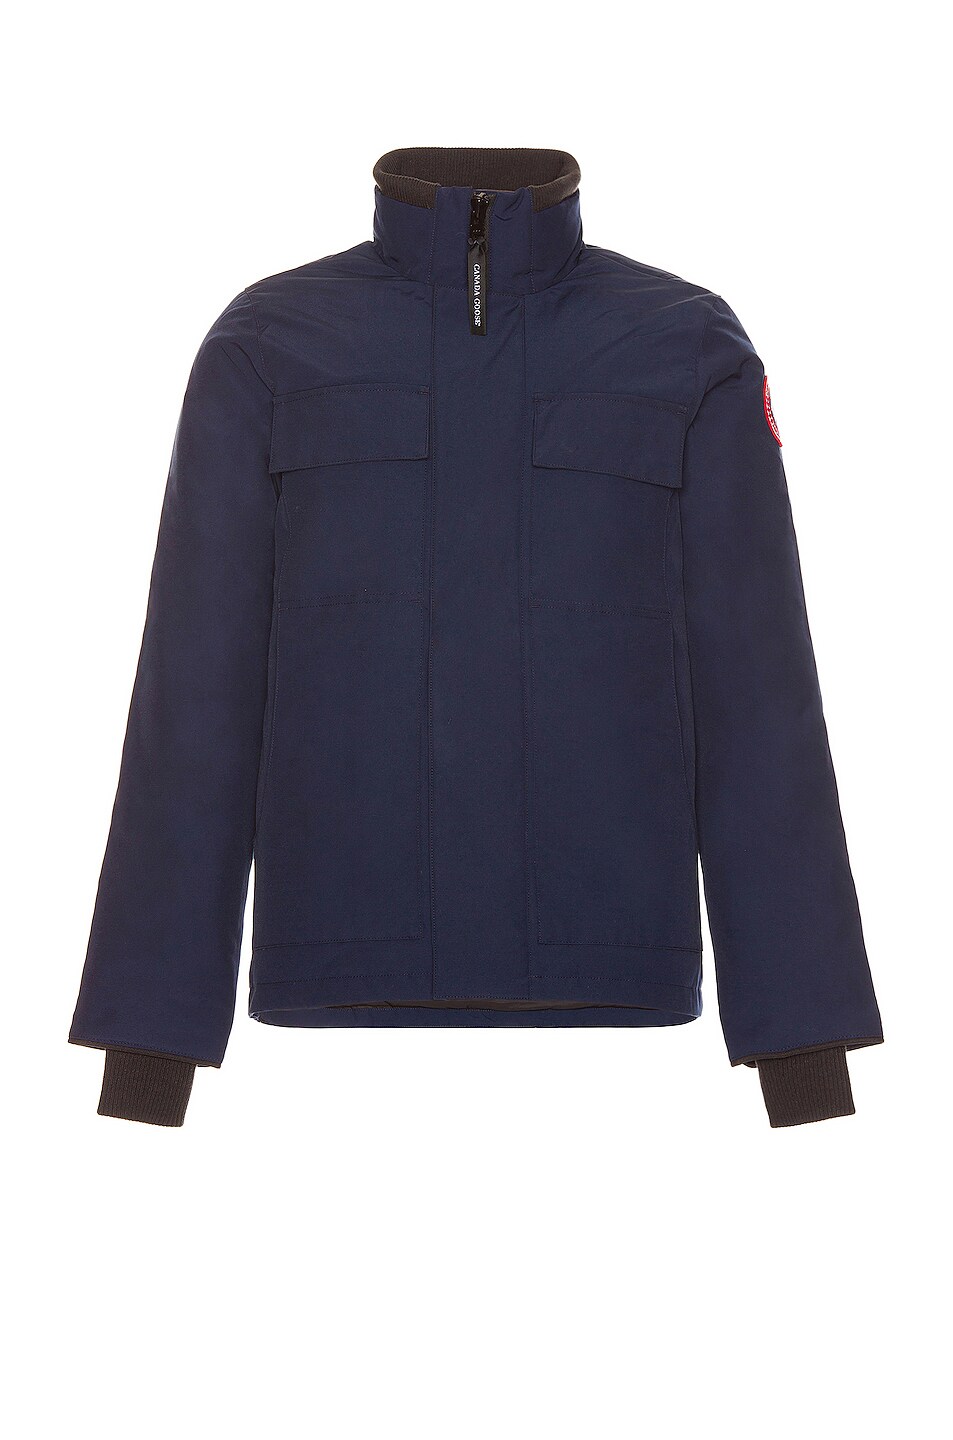 Image 1 of Canada Goose Forester Jacket in Atlantic Navy